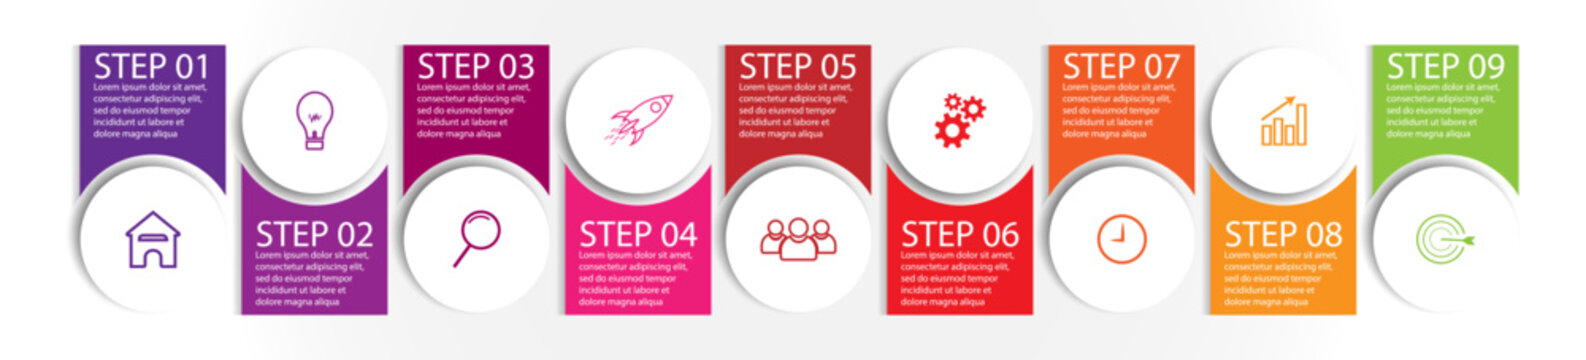 9 step infographic, simple infographic design consisting of nine interrelated parts, circle design combined with squares, lines, icons and colors, good for your business presentation